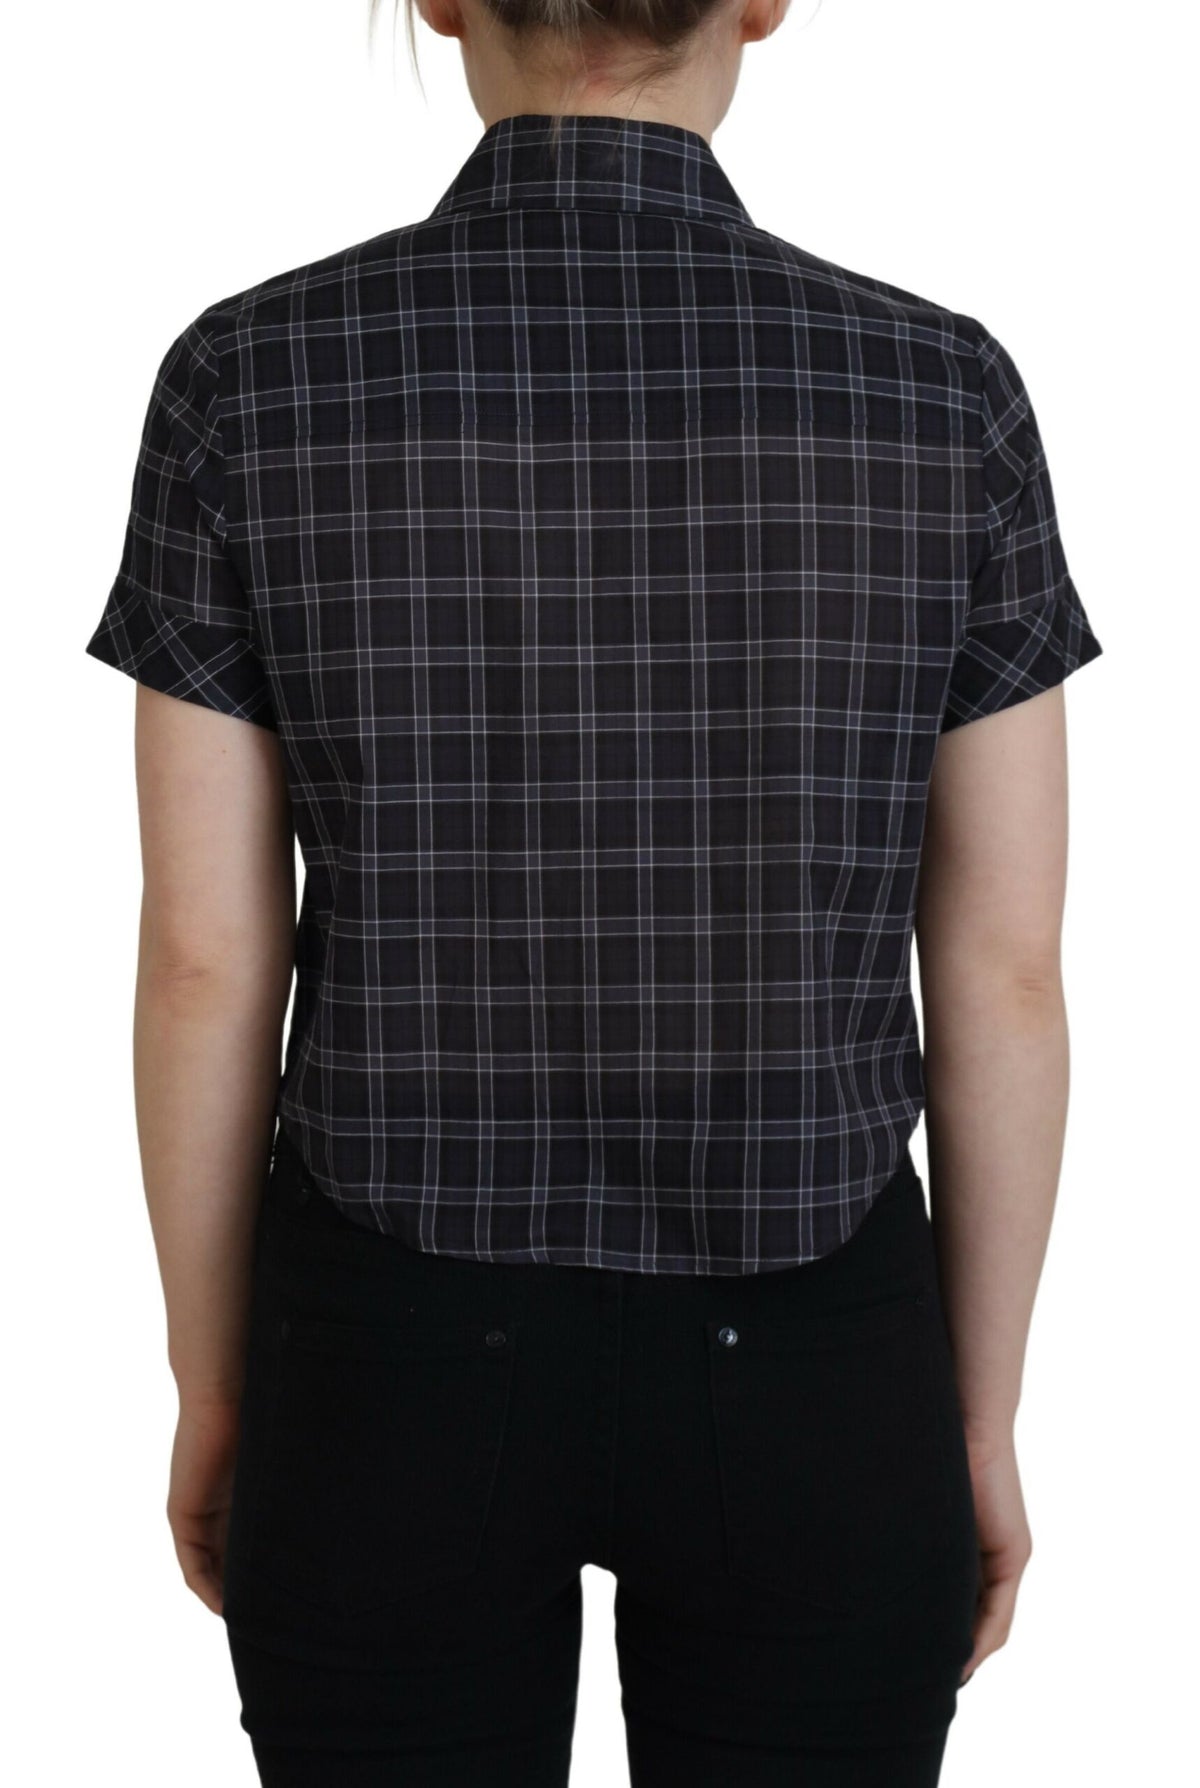 Dsquared² Black Checkered Collared Button Short Sleeves Top